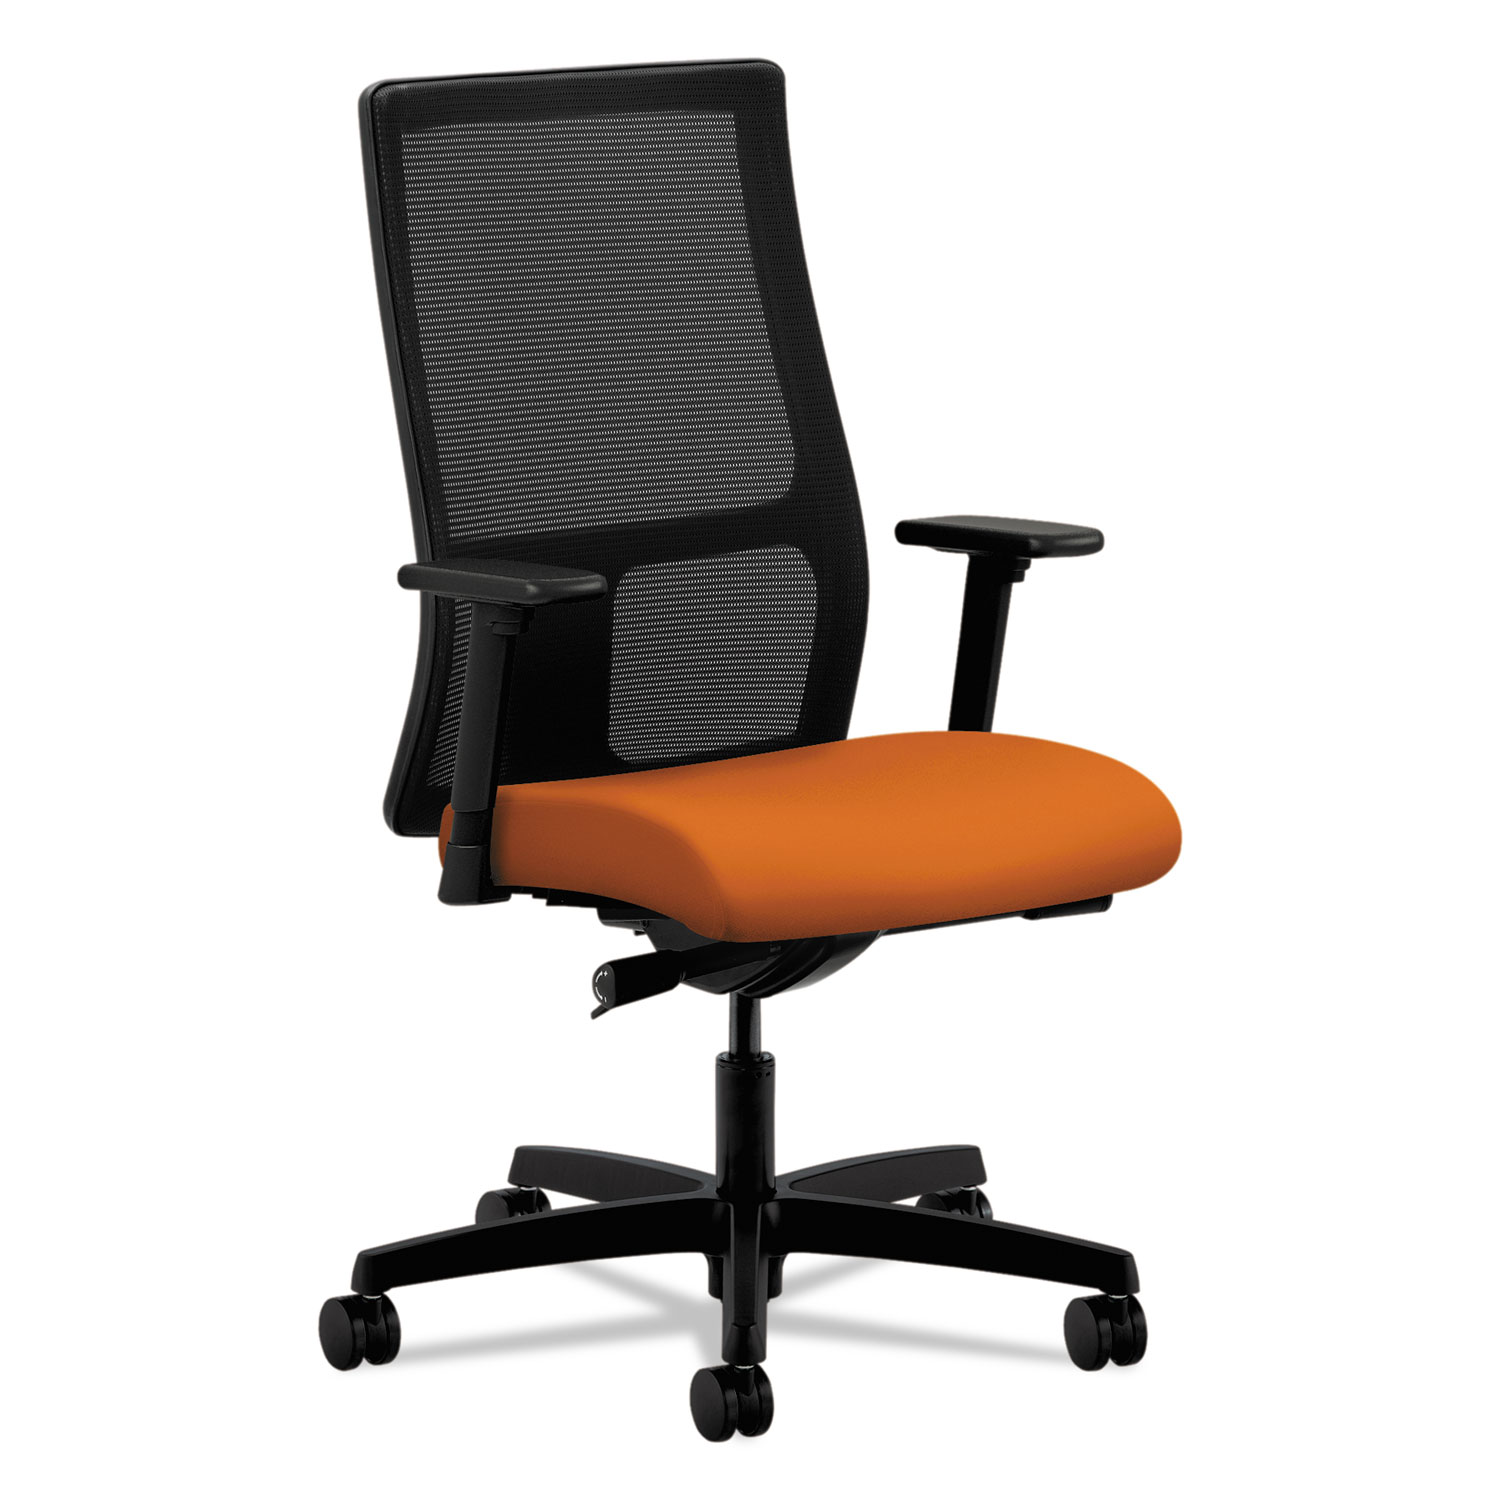  HON HIWM2.A.H.M.CU47.T.SB Ignition Series Mesh Mid-Back Work Chair, Supports up to 300 lbs., Apricot Seat/Black Back, Black Base (HONIW103CU47) 